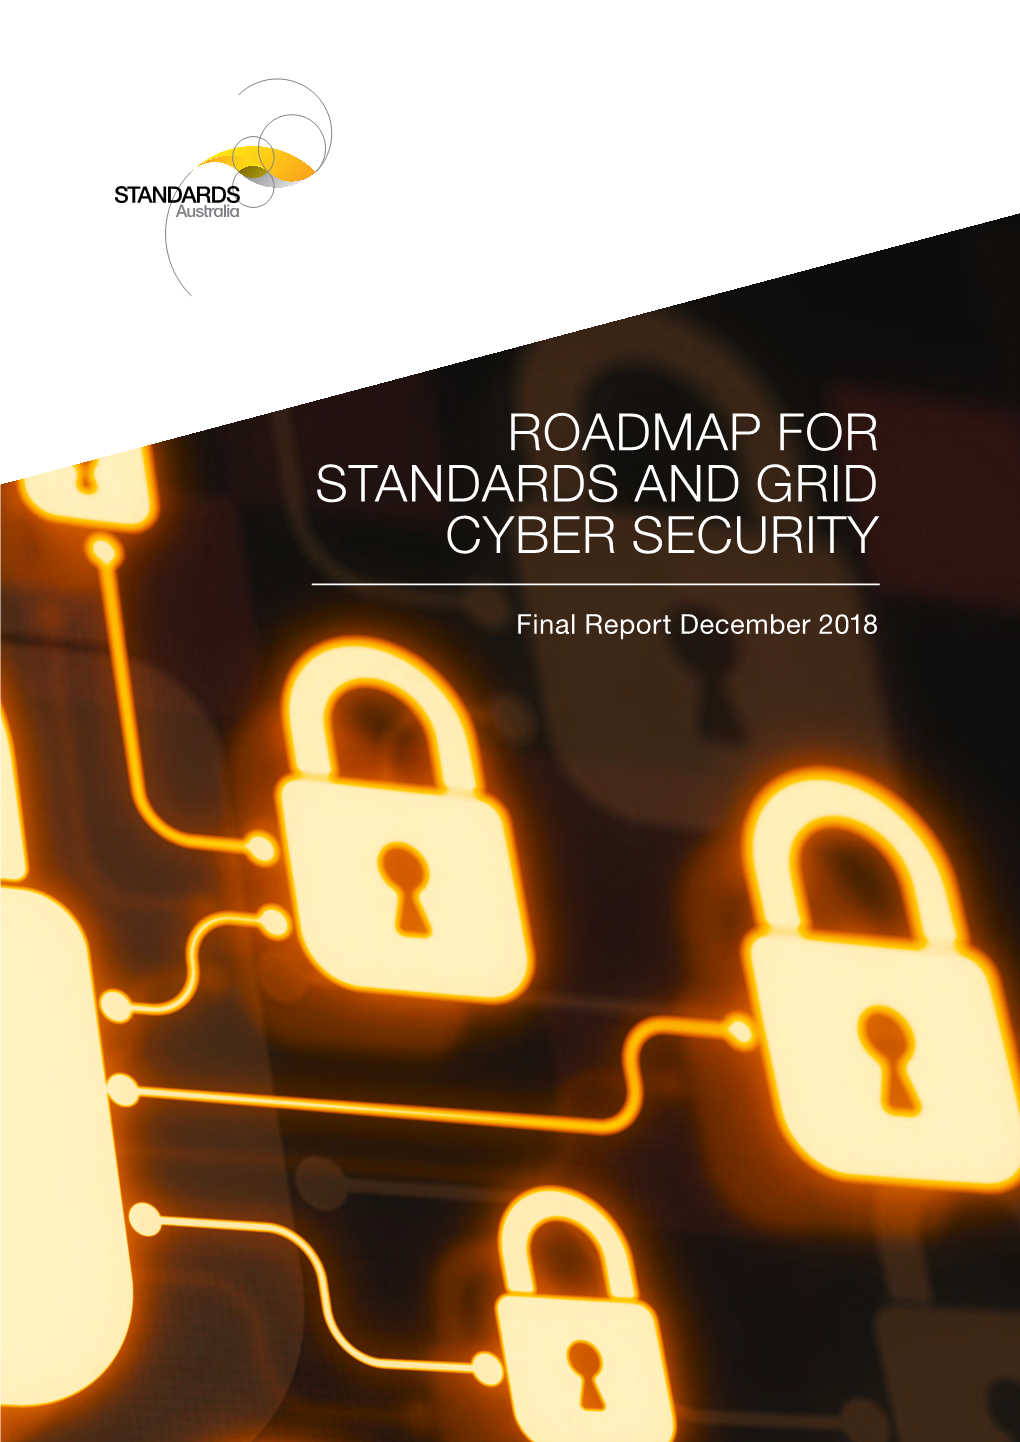 Roadmap for Standards and Grid Cyber Security